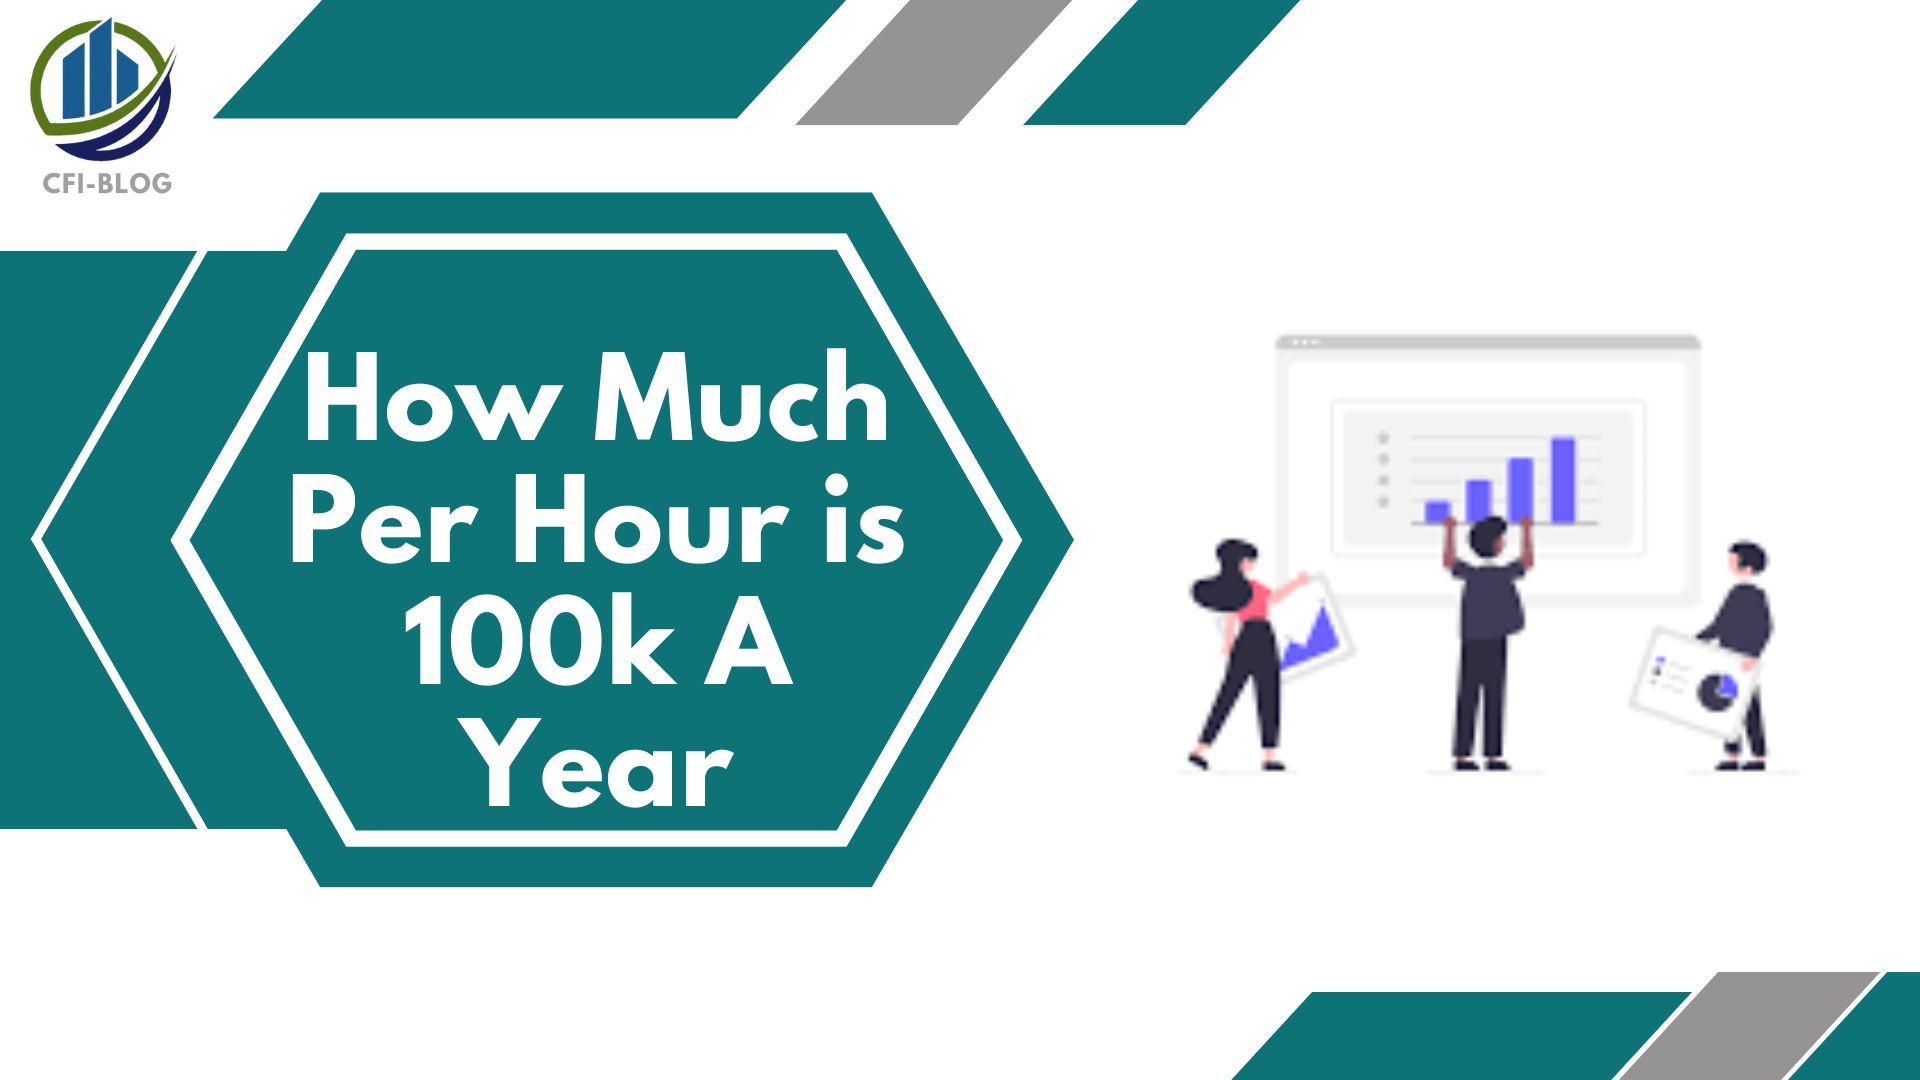 How Much Per Hour is 100K a Year